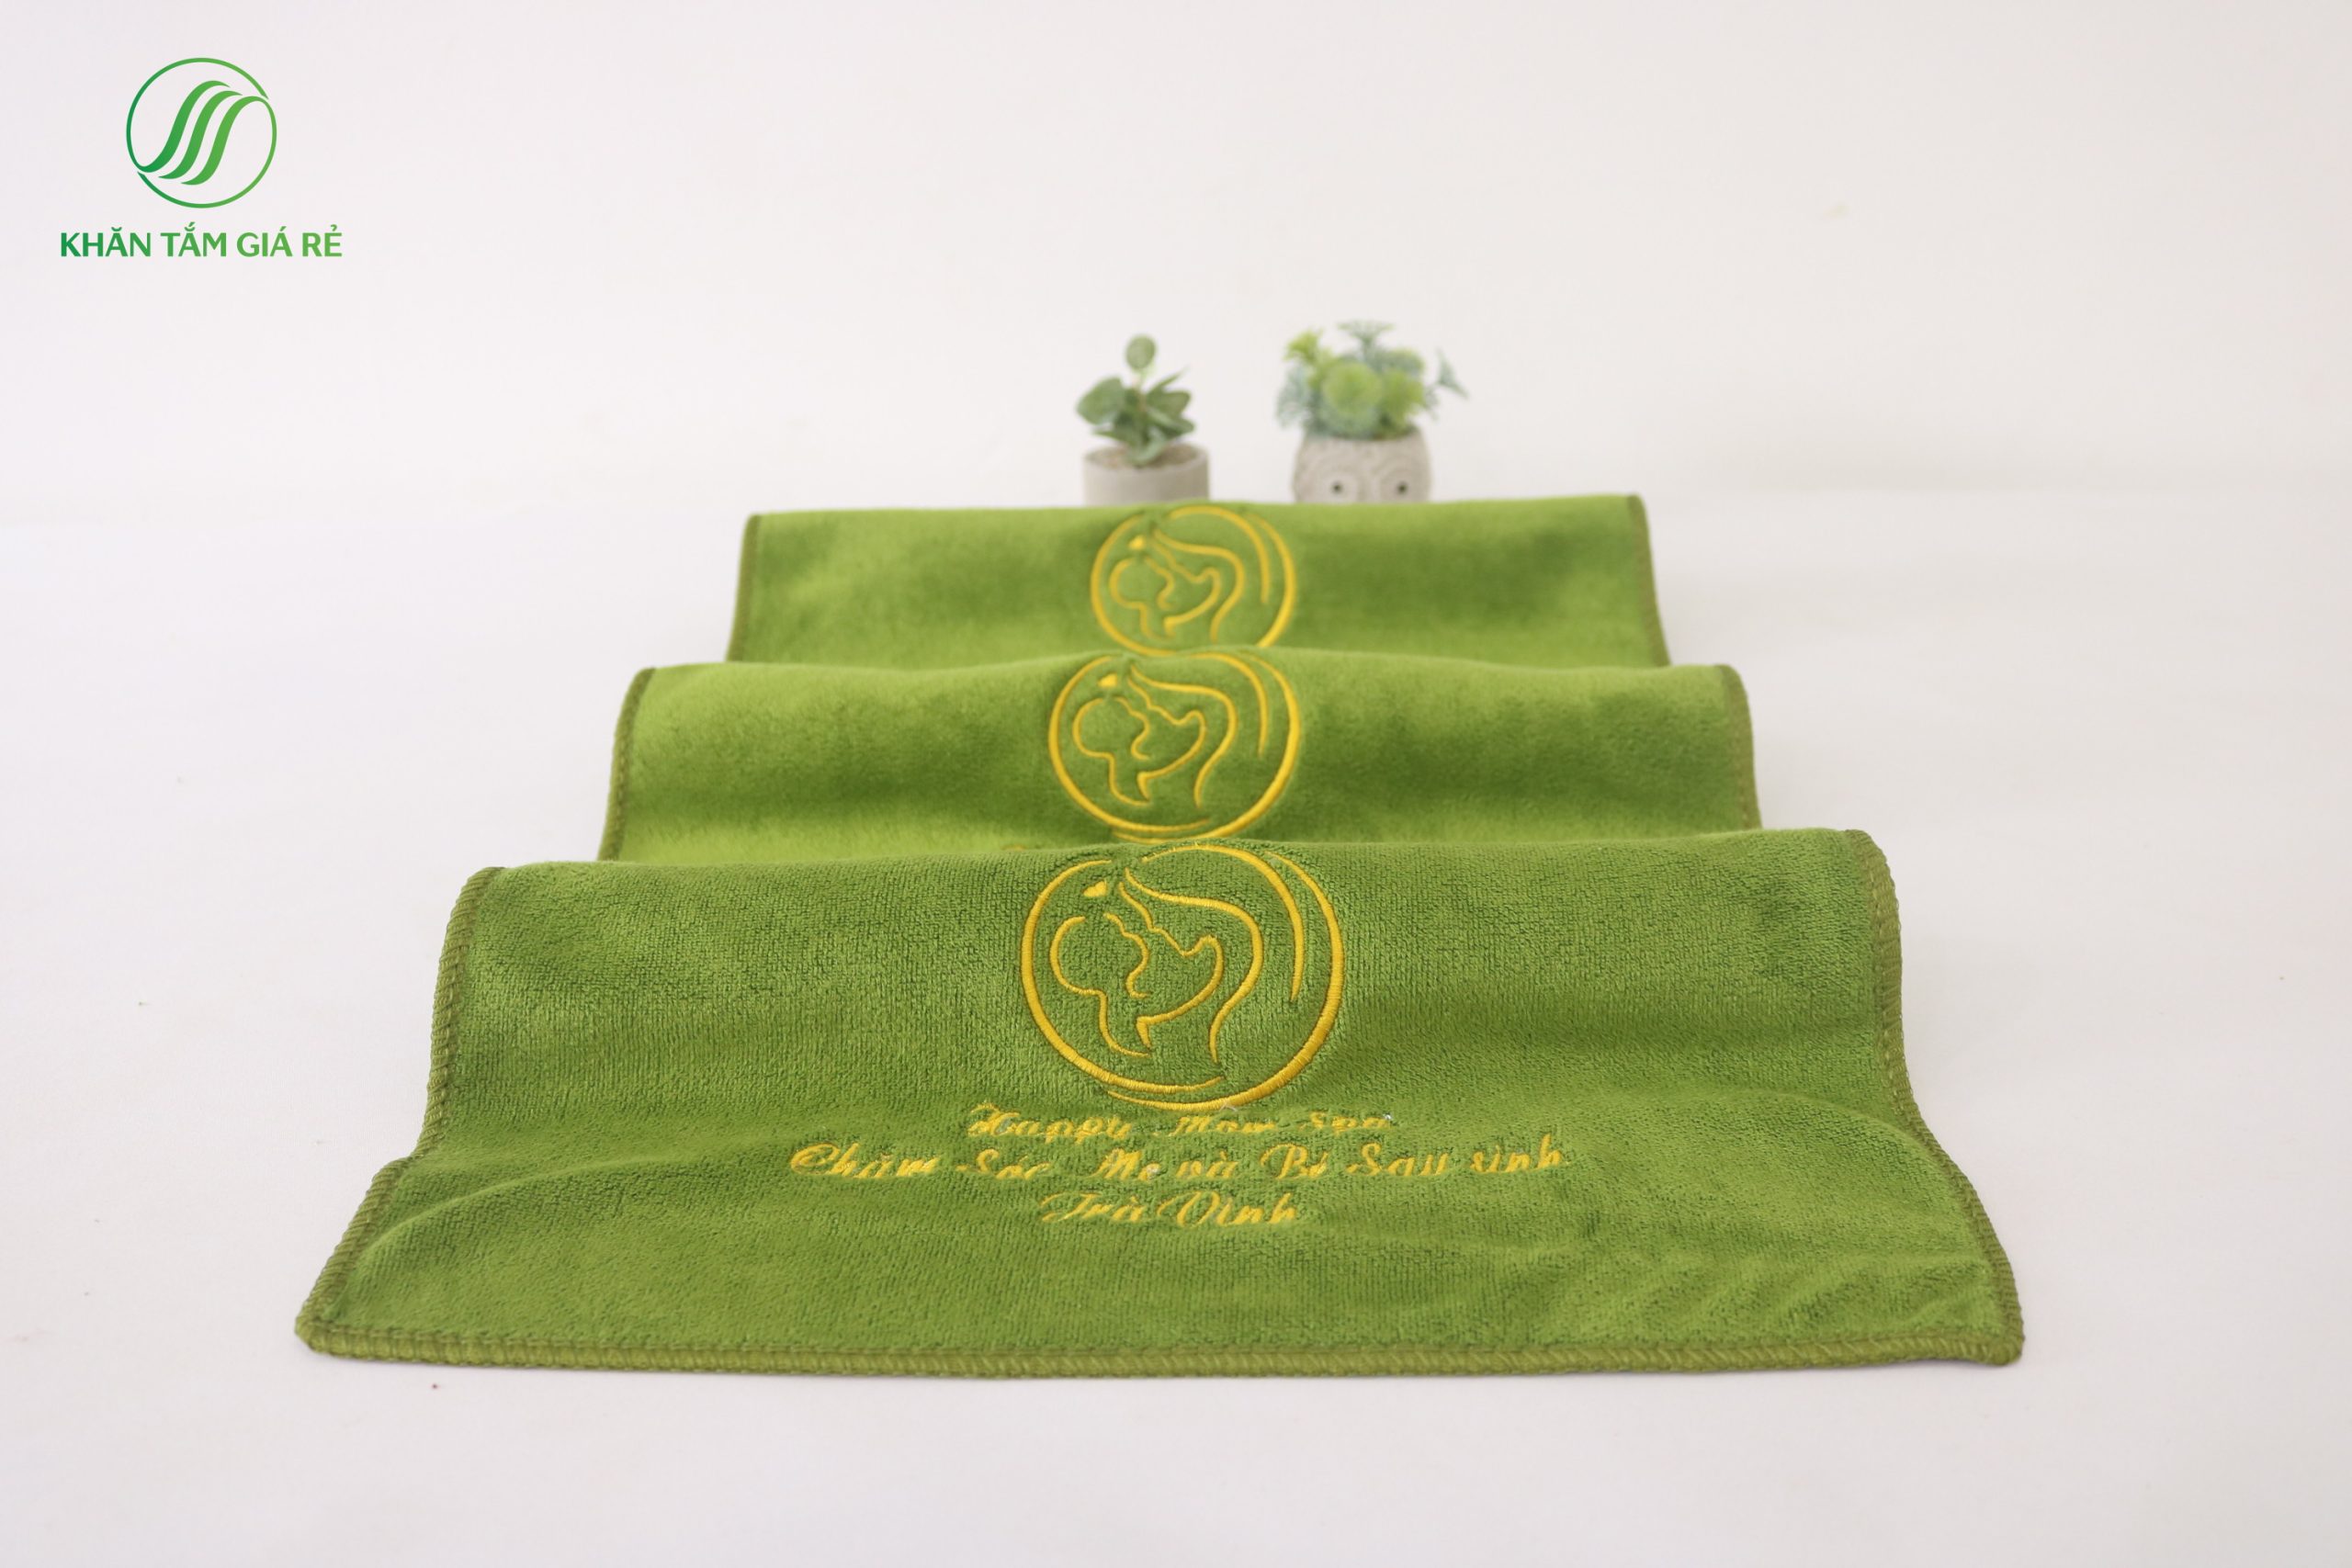 Choice of towel spa Tra Vinh with elegant colors, cool, help customers relax